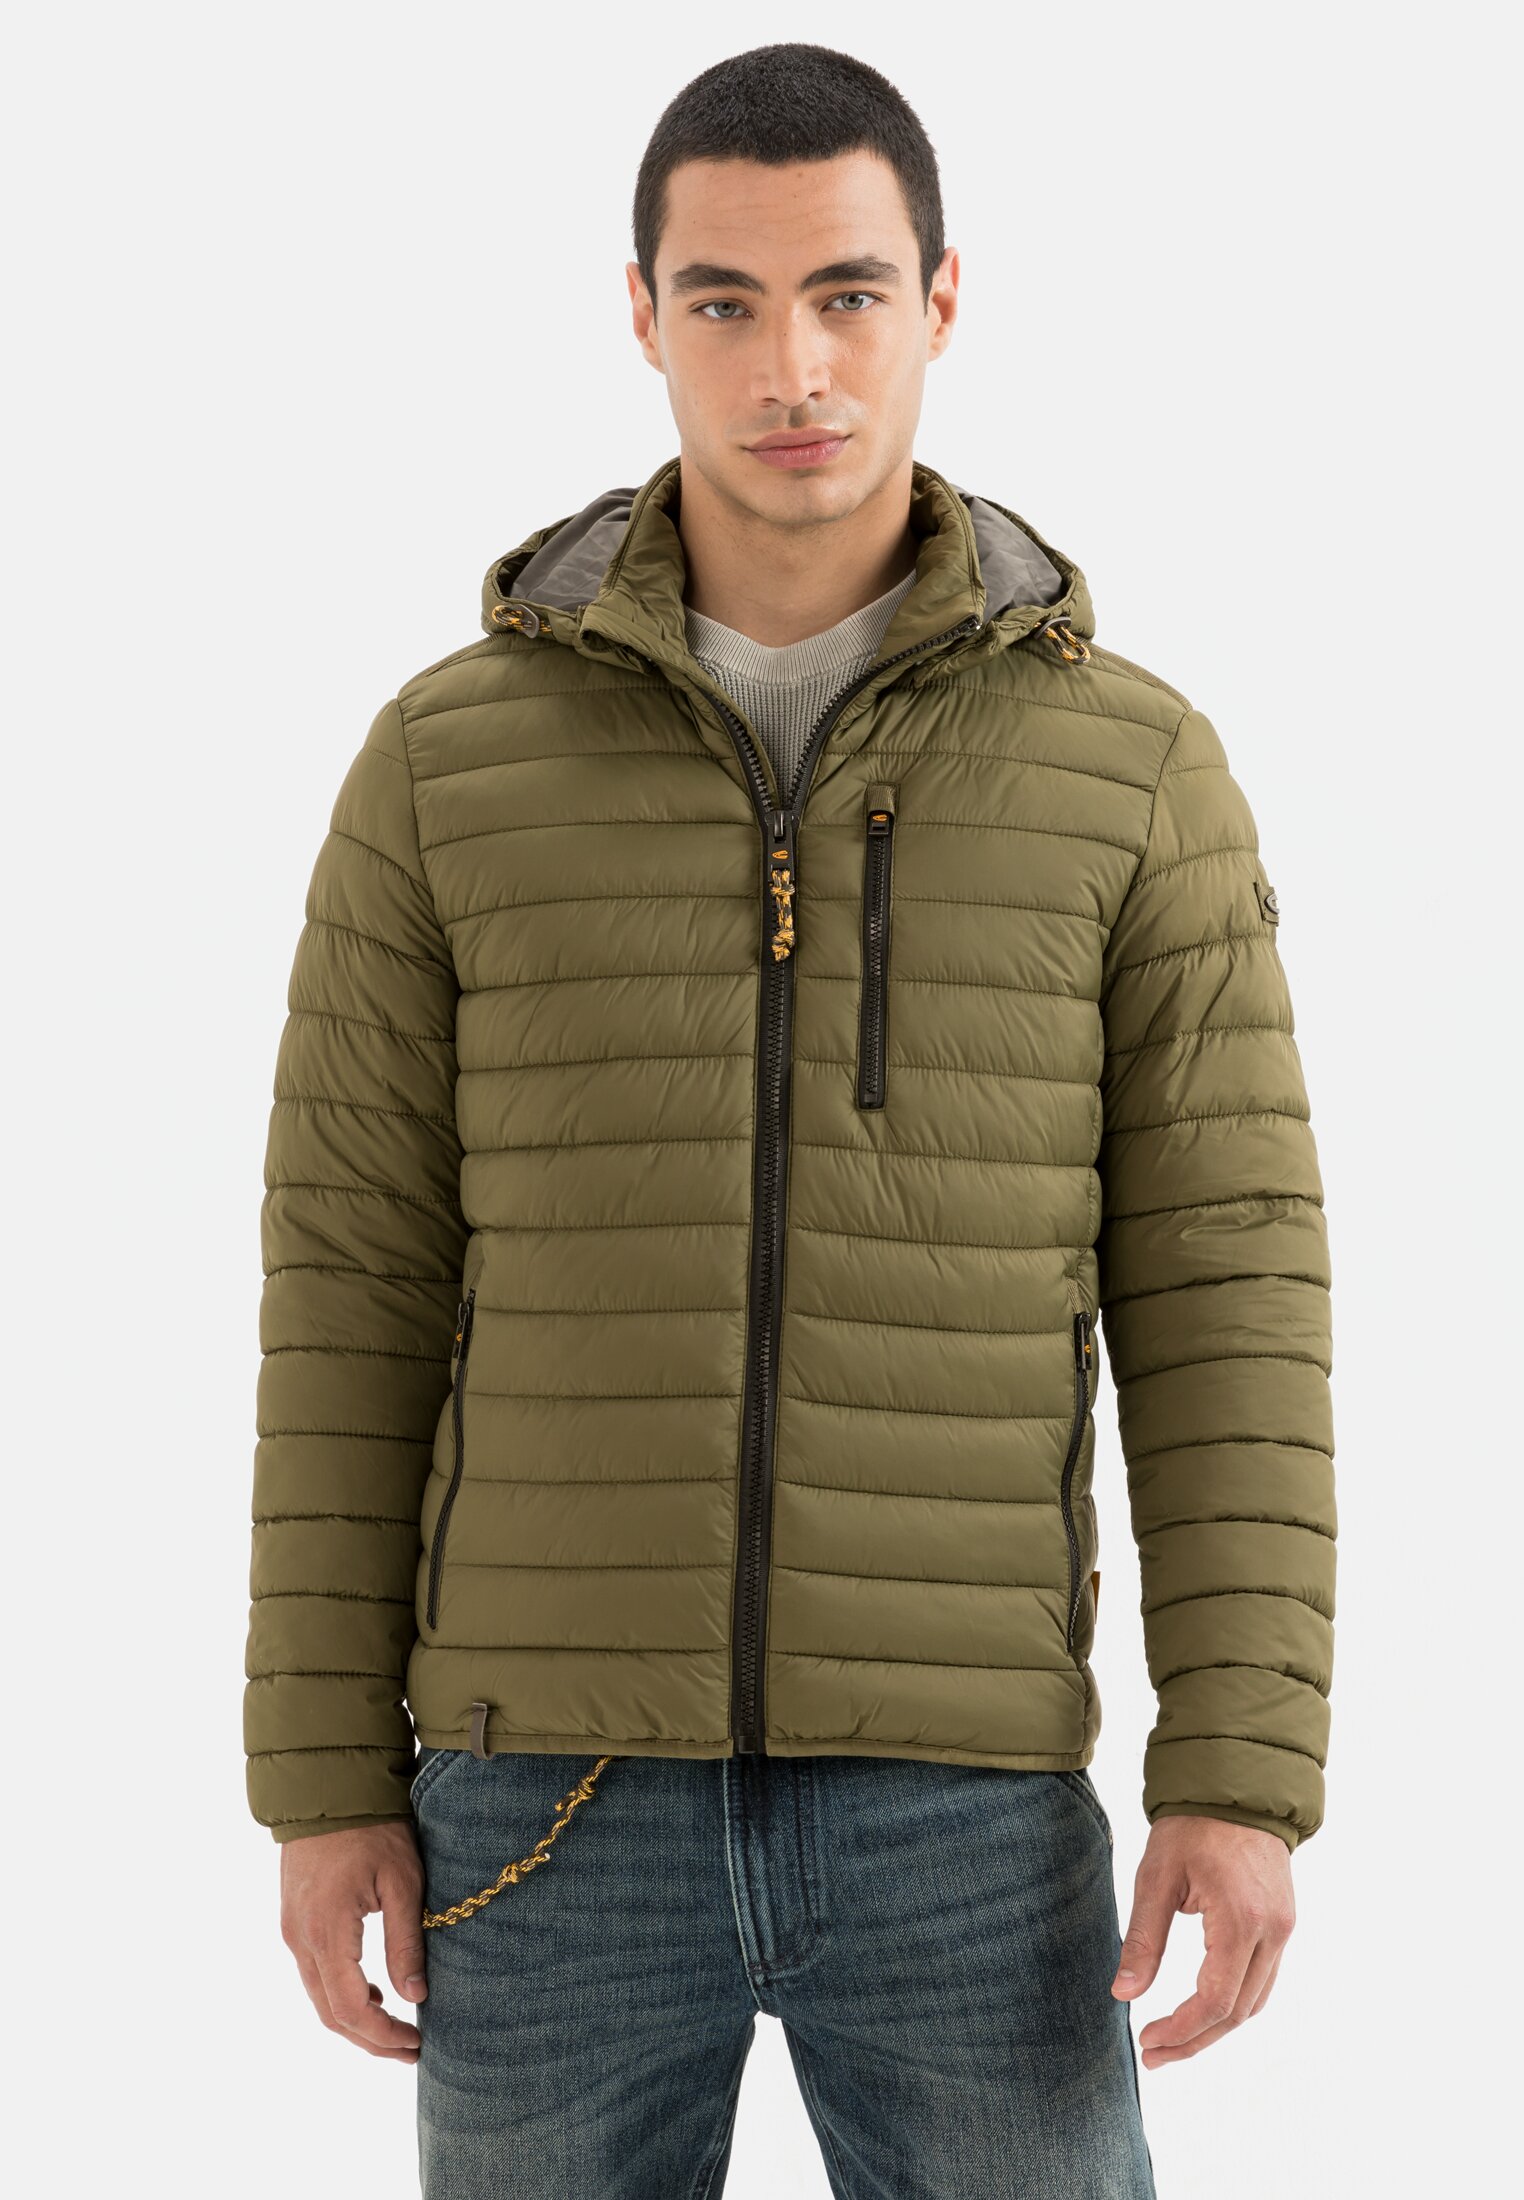 Quilted blouson for Herren 48 in Olive | Brown act camel 